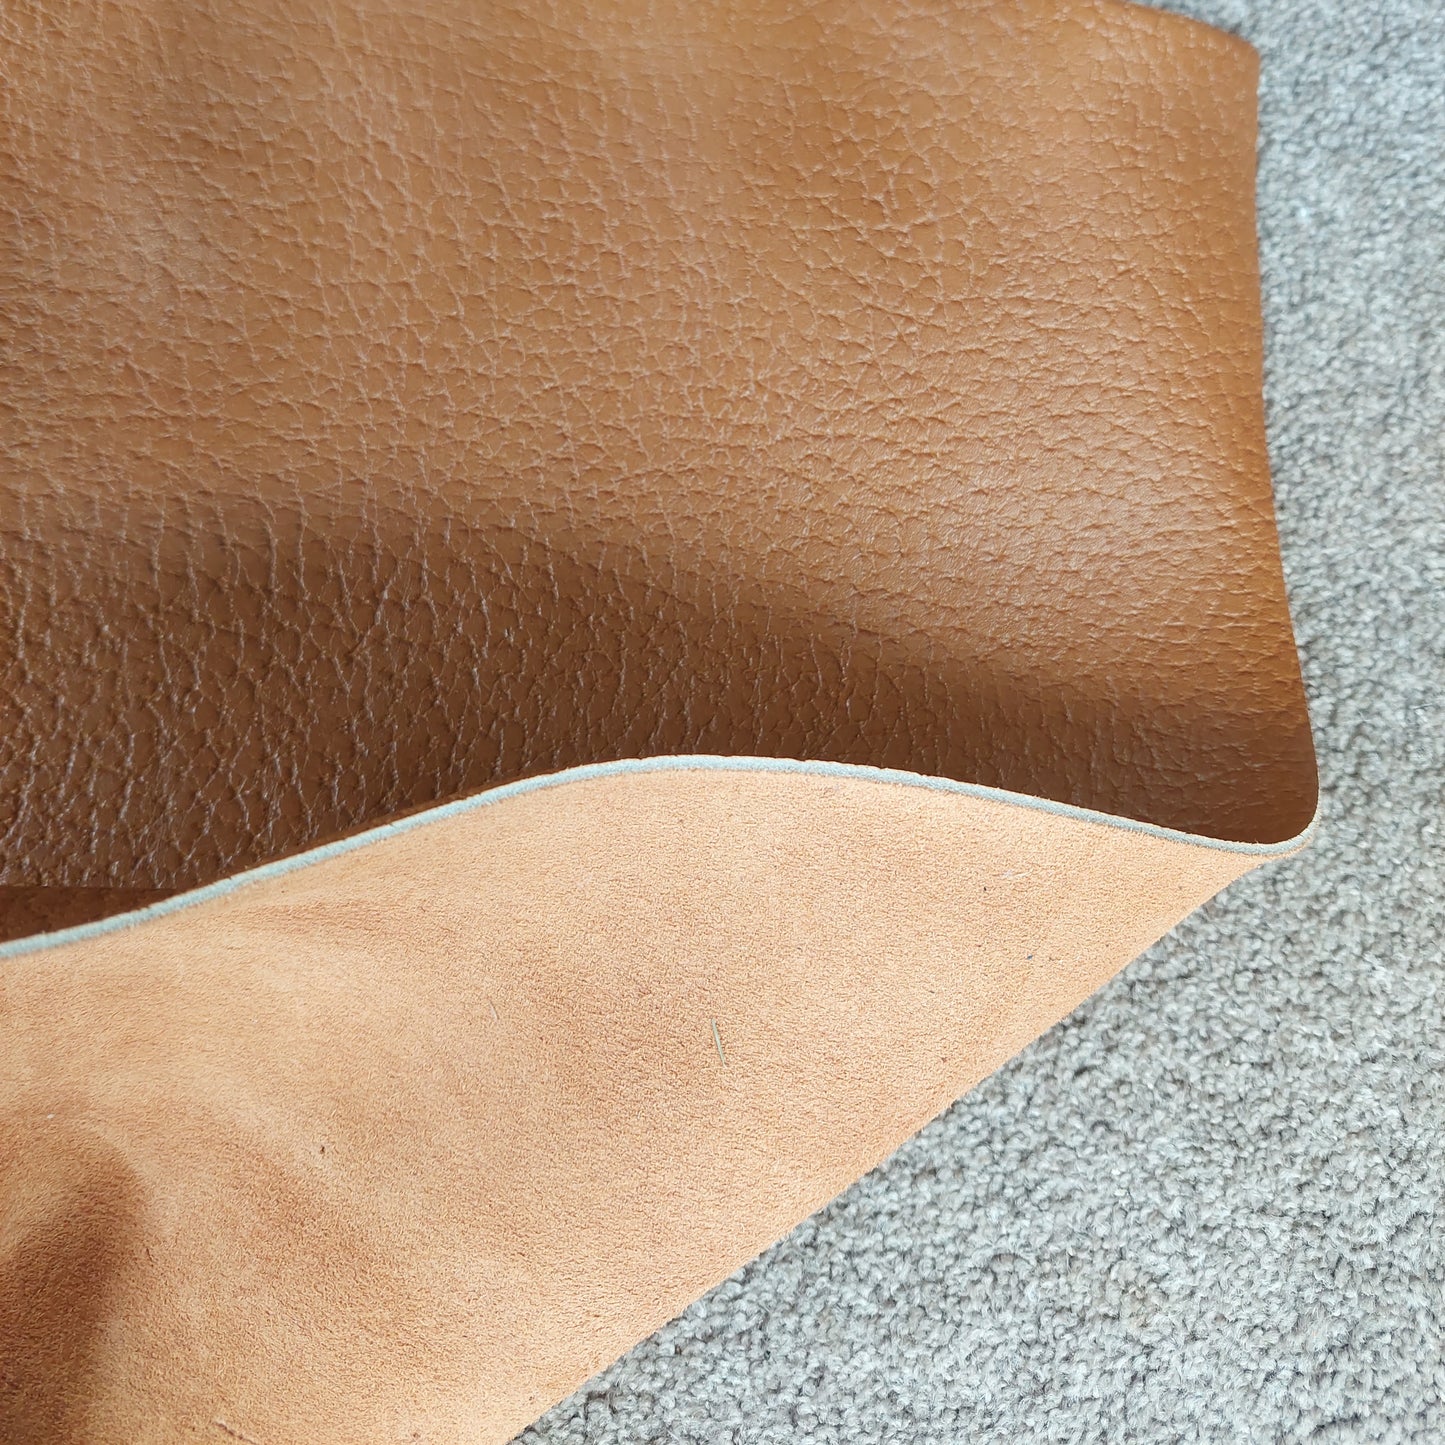 Textured Tan Leather Piece